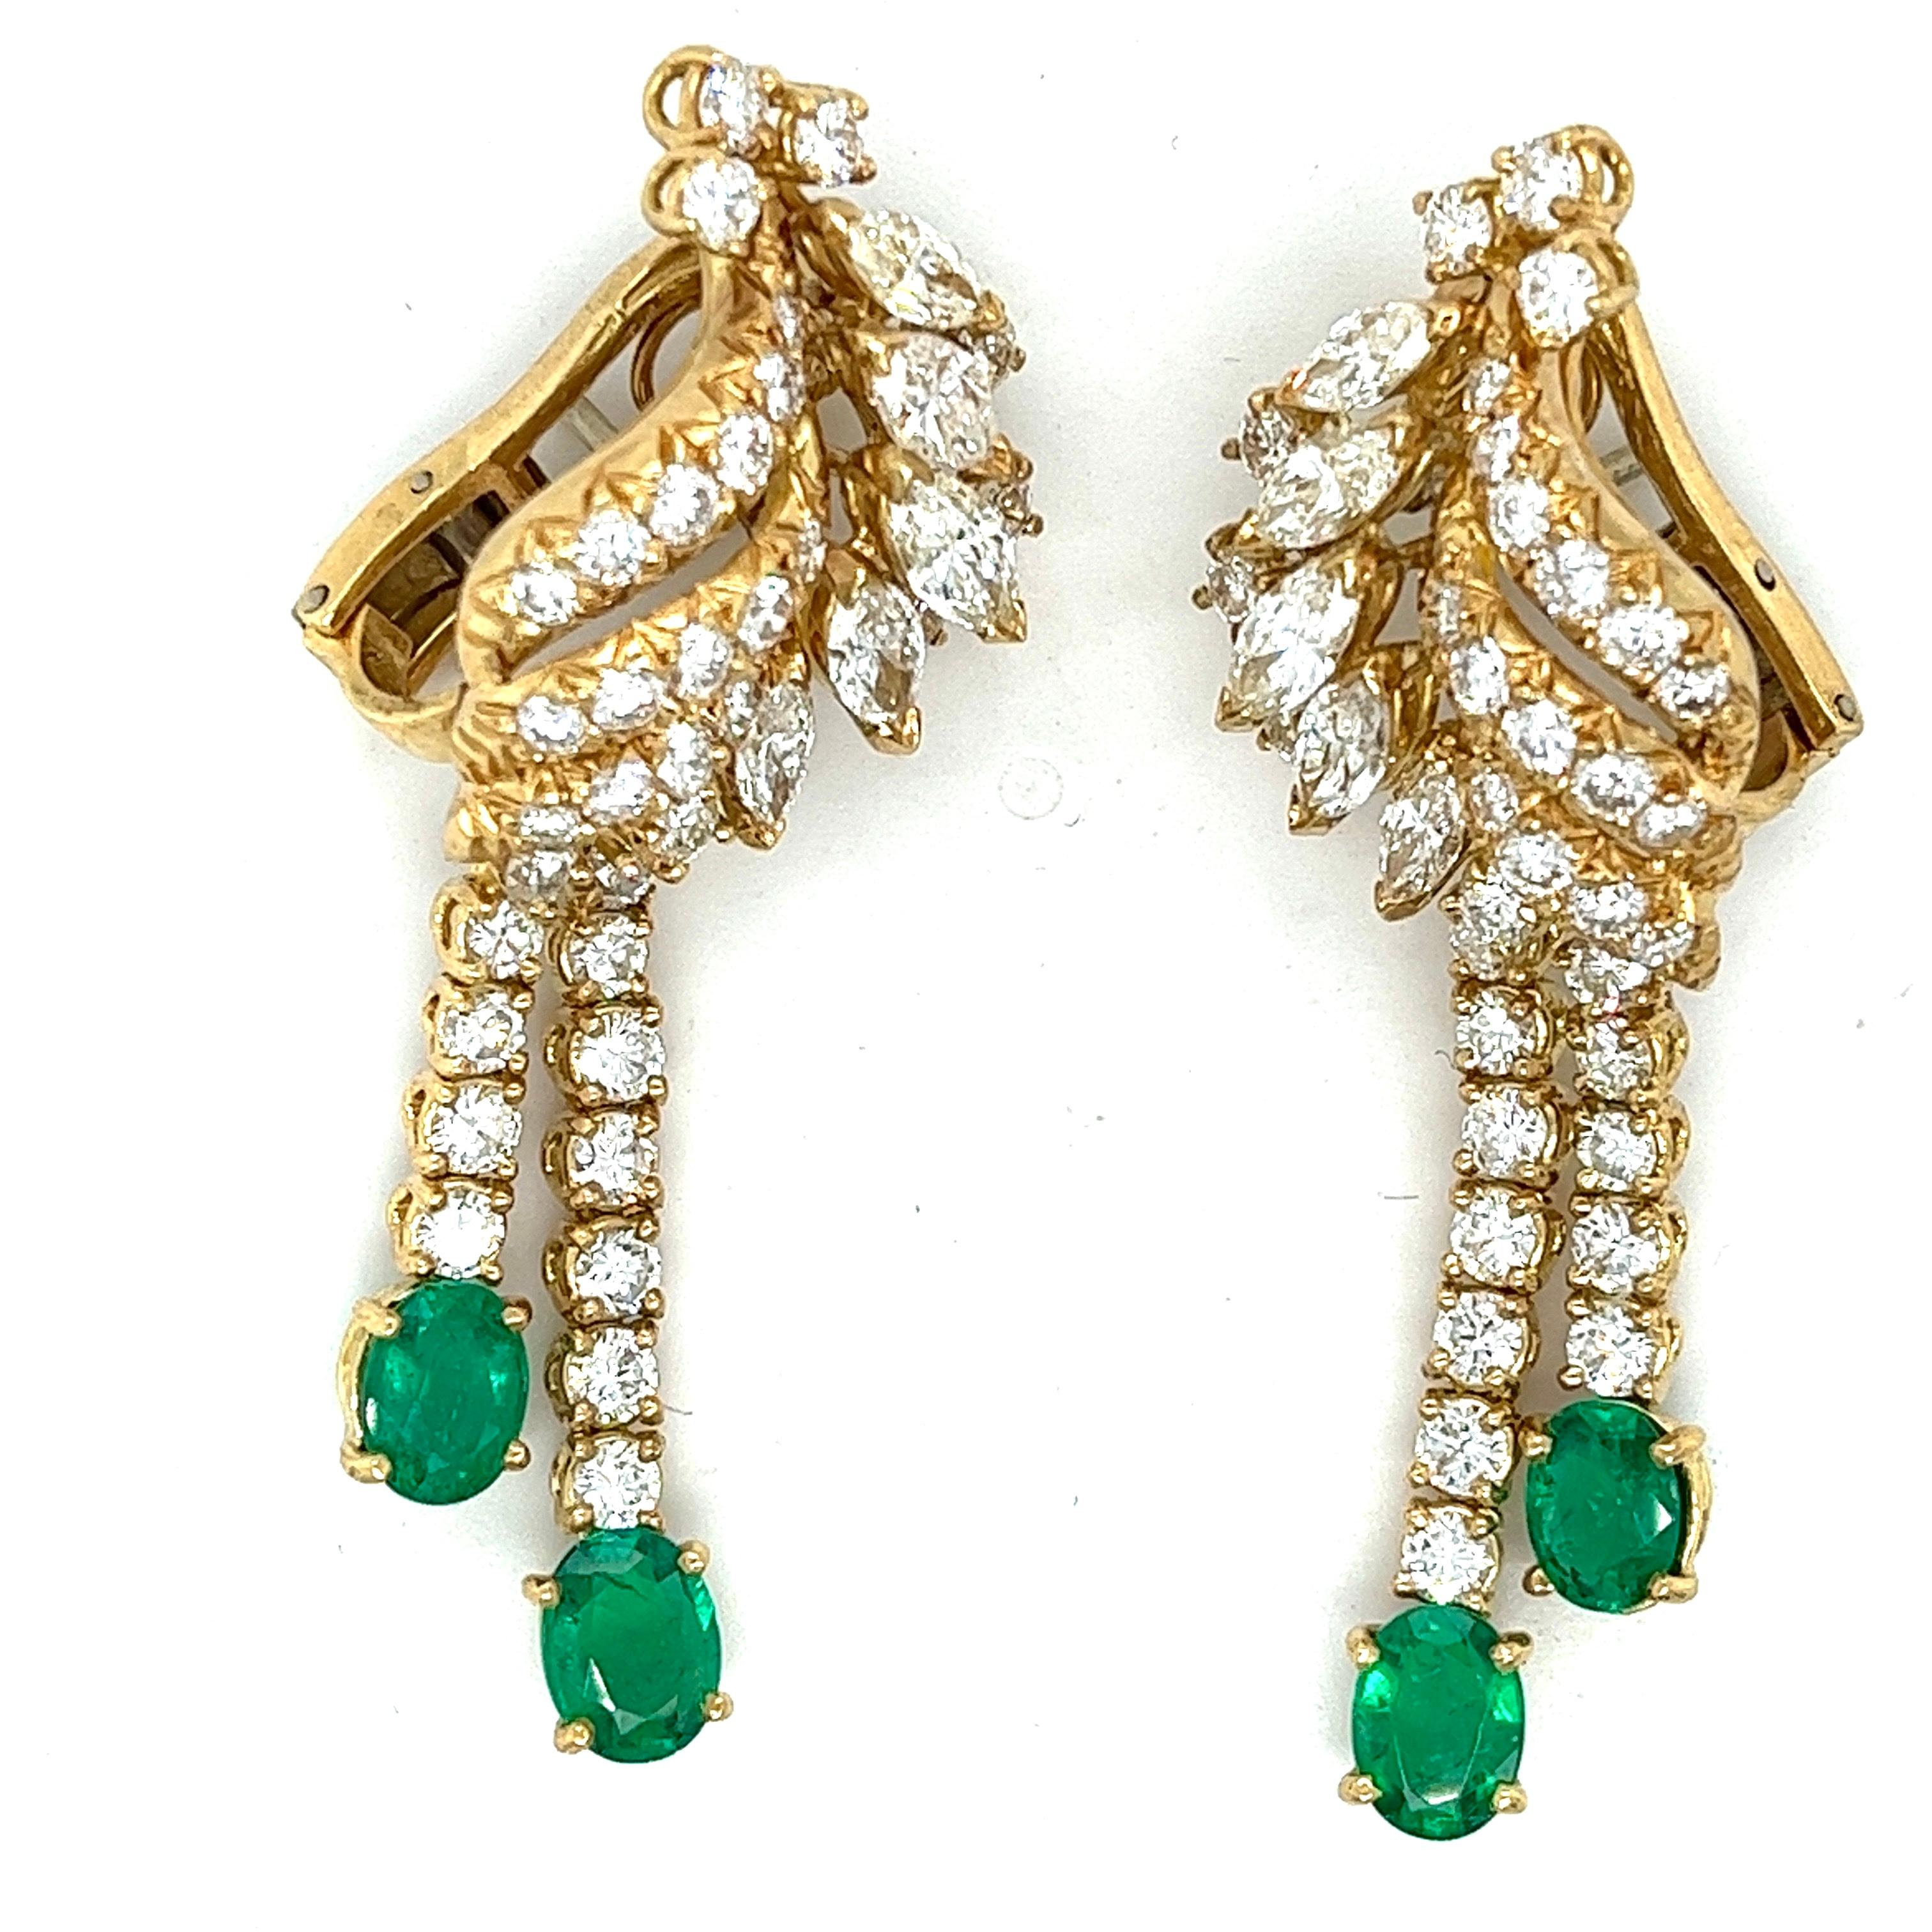 Heirloom 9.75 Carats Diamond Emerald Waterfall Earring, 18kt Italy, 1970's For Sale 3